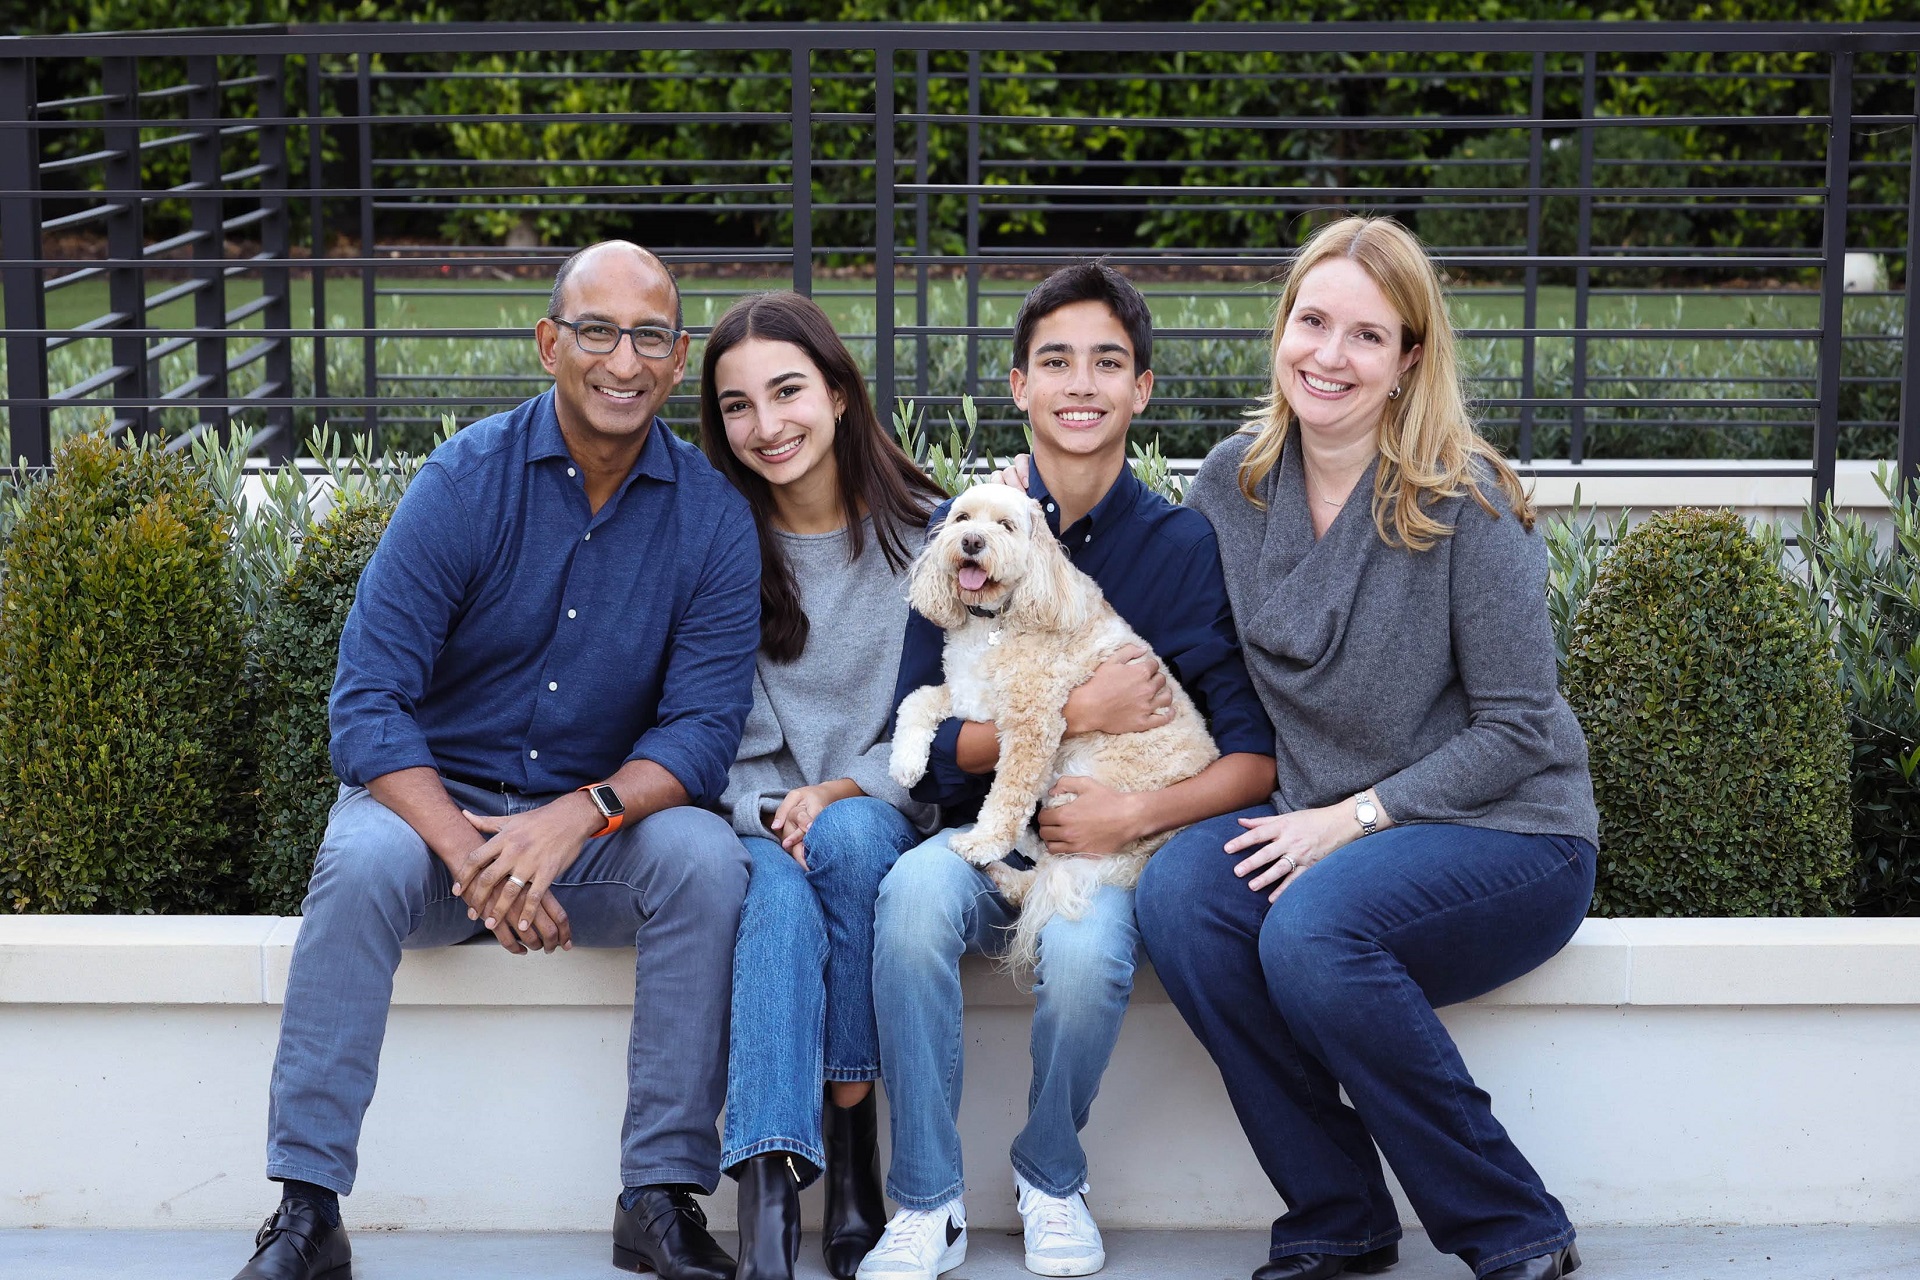 A smiling family of five sit on an outdoor planter with chubby, green bushes behind them. From left to right: A bald dad with glasses sits next to his daughter with long, brown hair and jeans. She, sits next to her brother who smiles holding a happy tan dog with floppy ears. He is seated next to his mother with blond hair and a gray, scoop-neck blouse.